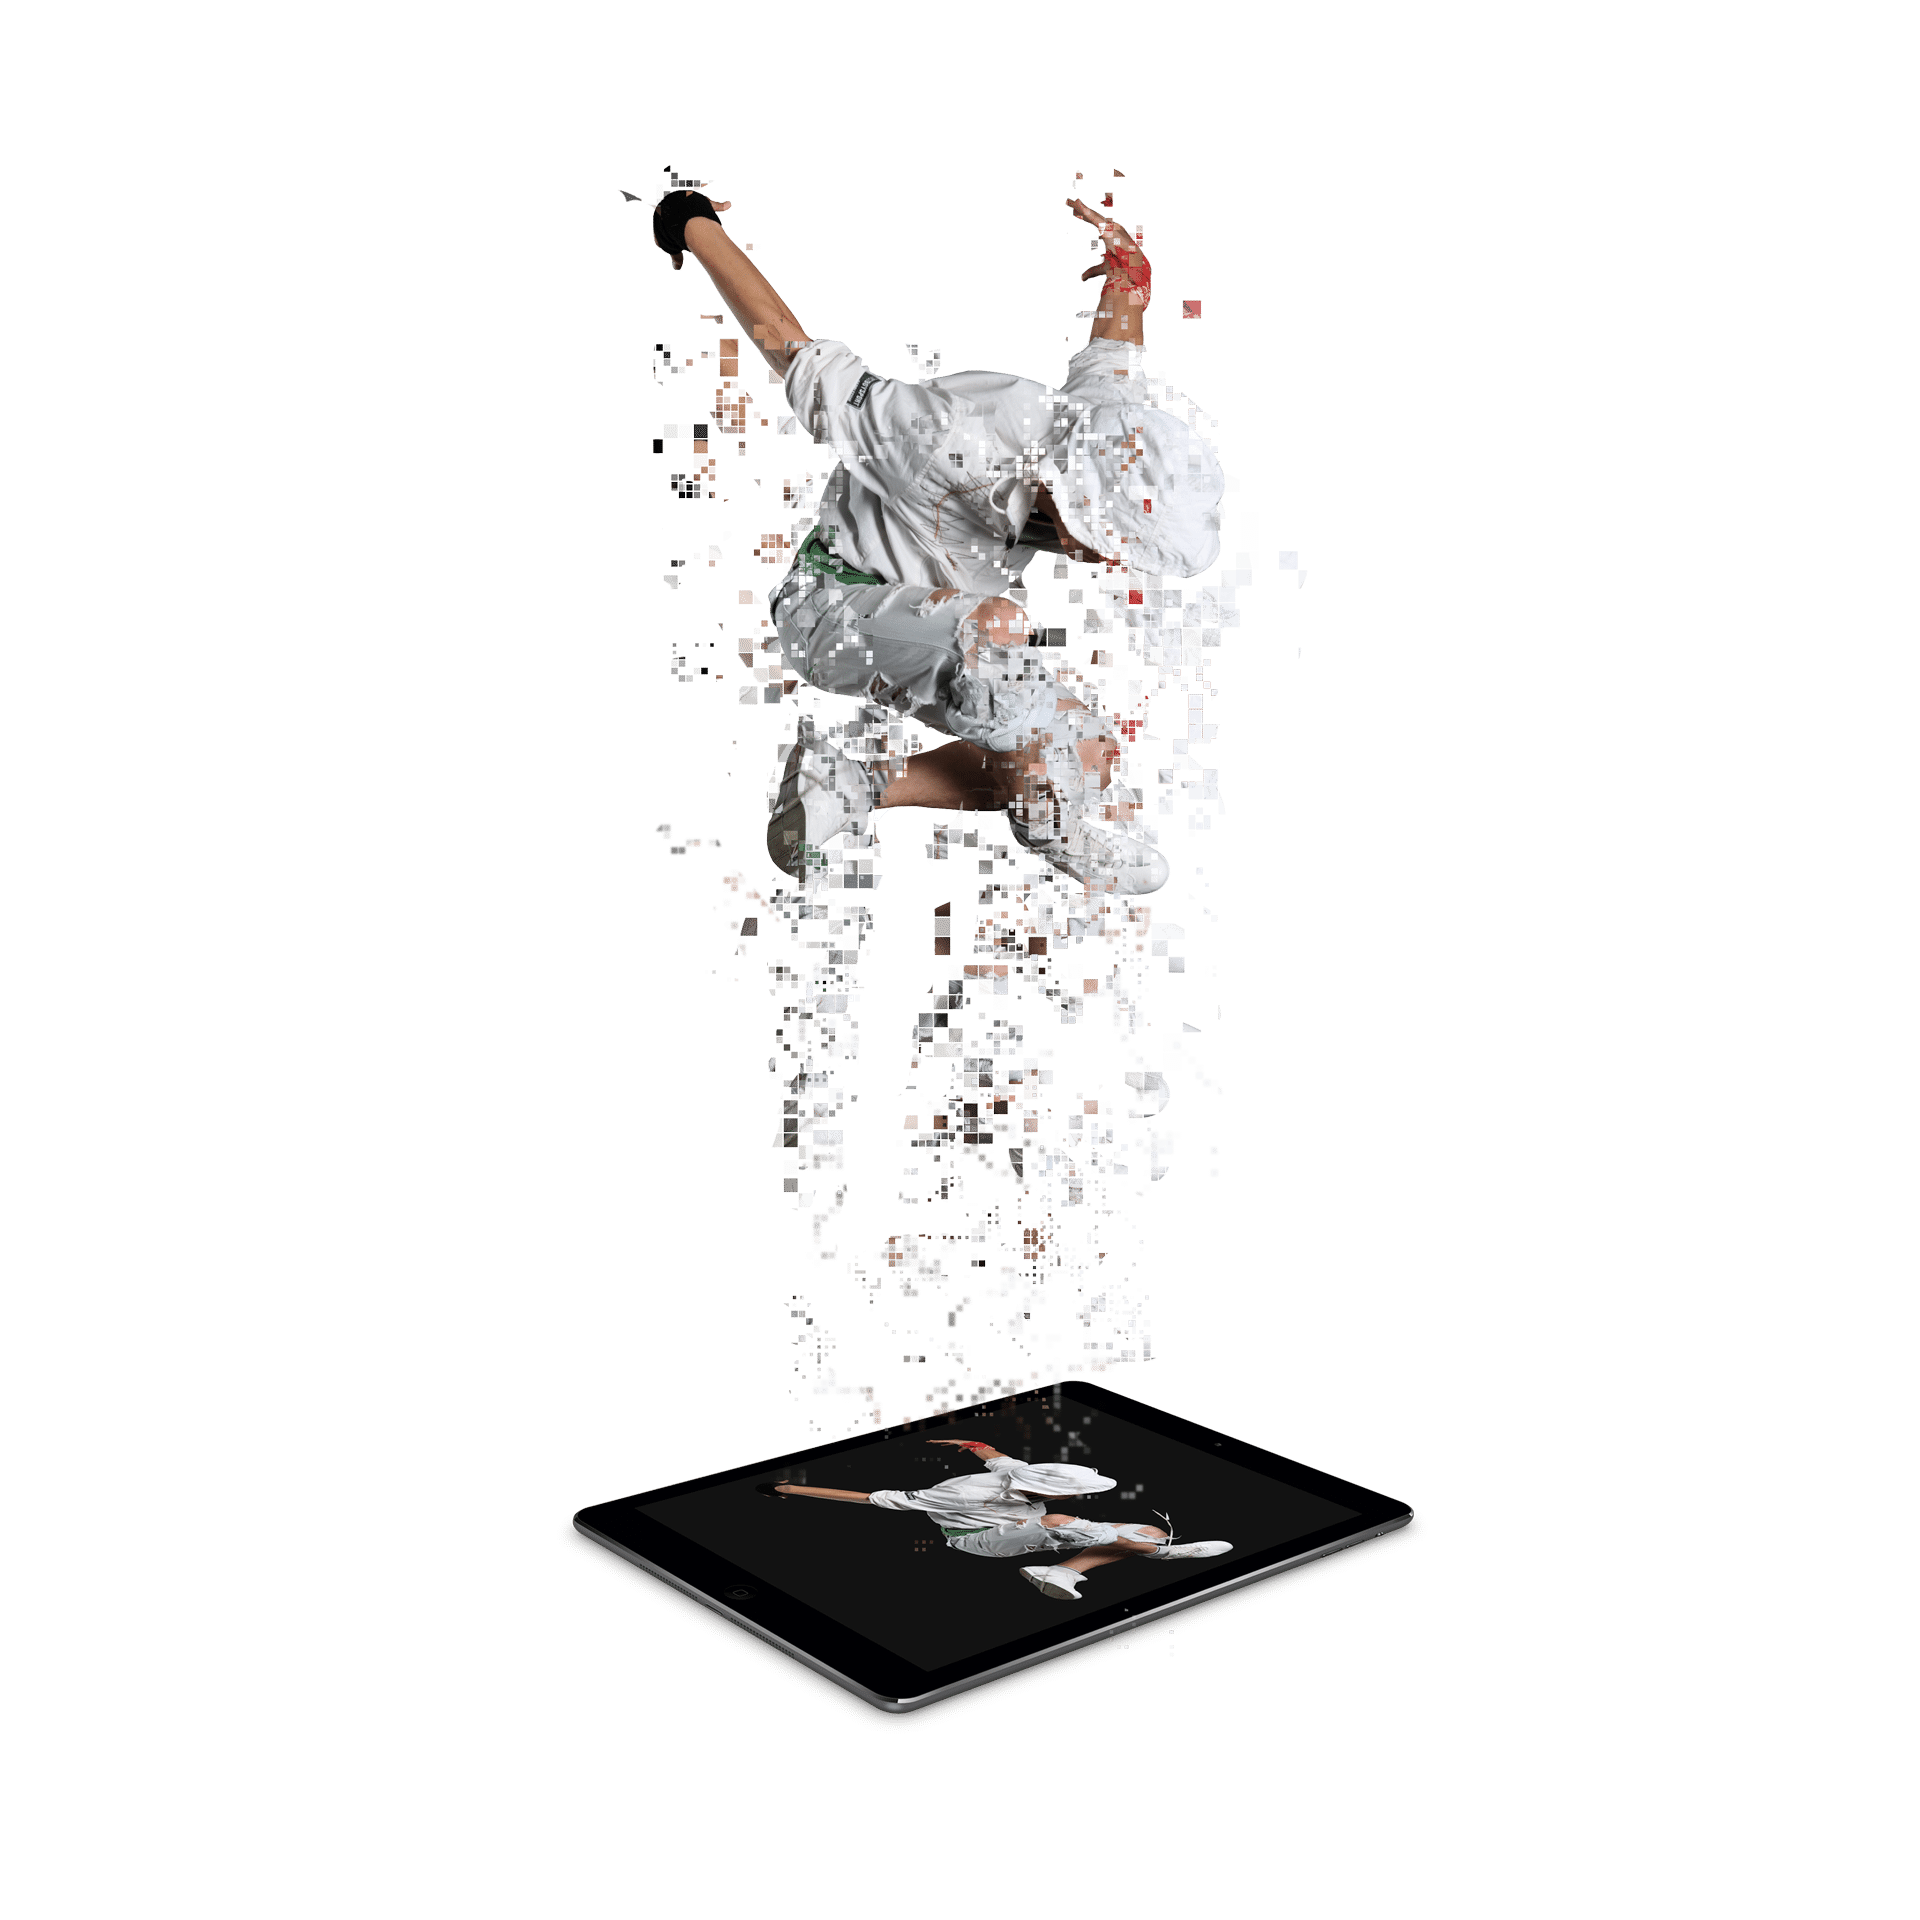 An abstract representation of our Website Design Studio 'About Us' page: a half-pixelated man hovers above an iPad, with pixels falling onto the screen, forming his image within the device. This image symbolizes the fusion of identity and connectivity, inviting exploration into the entity's story and values.